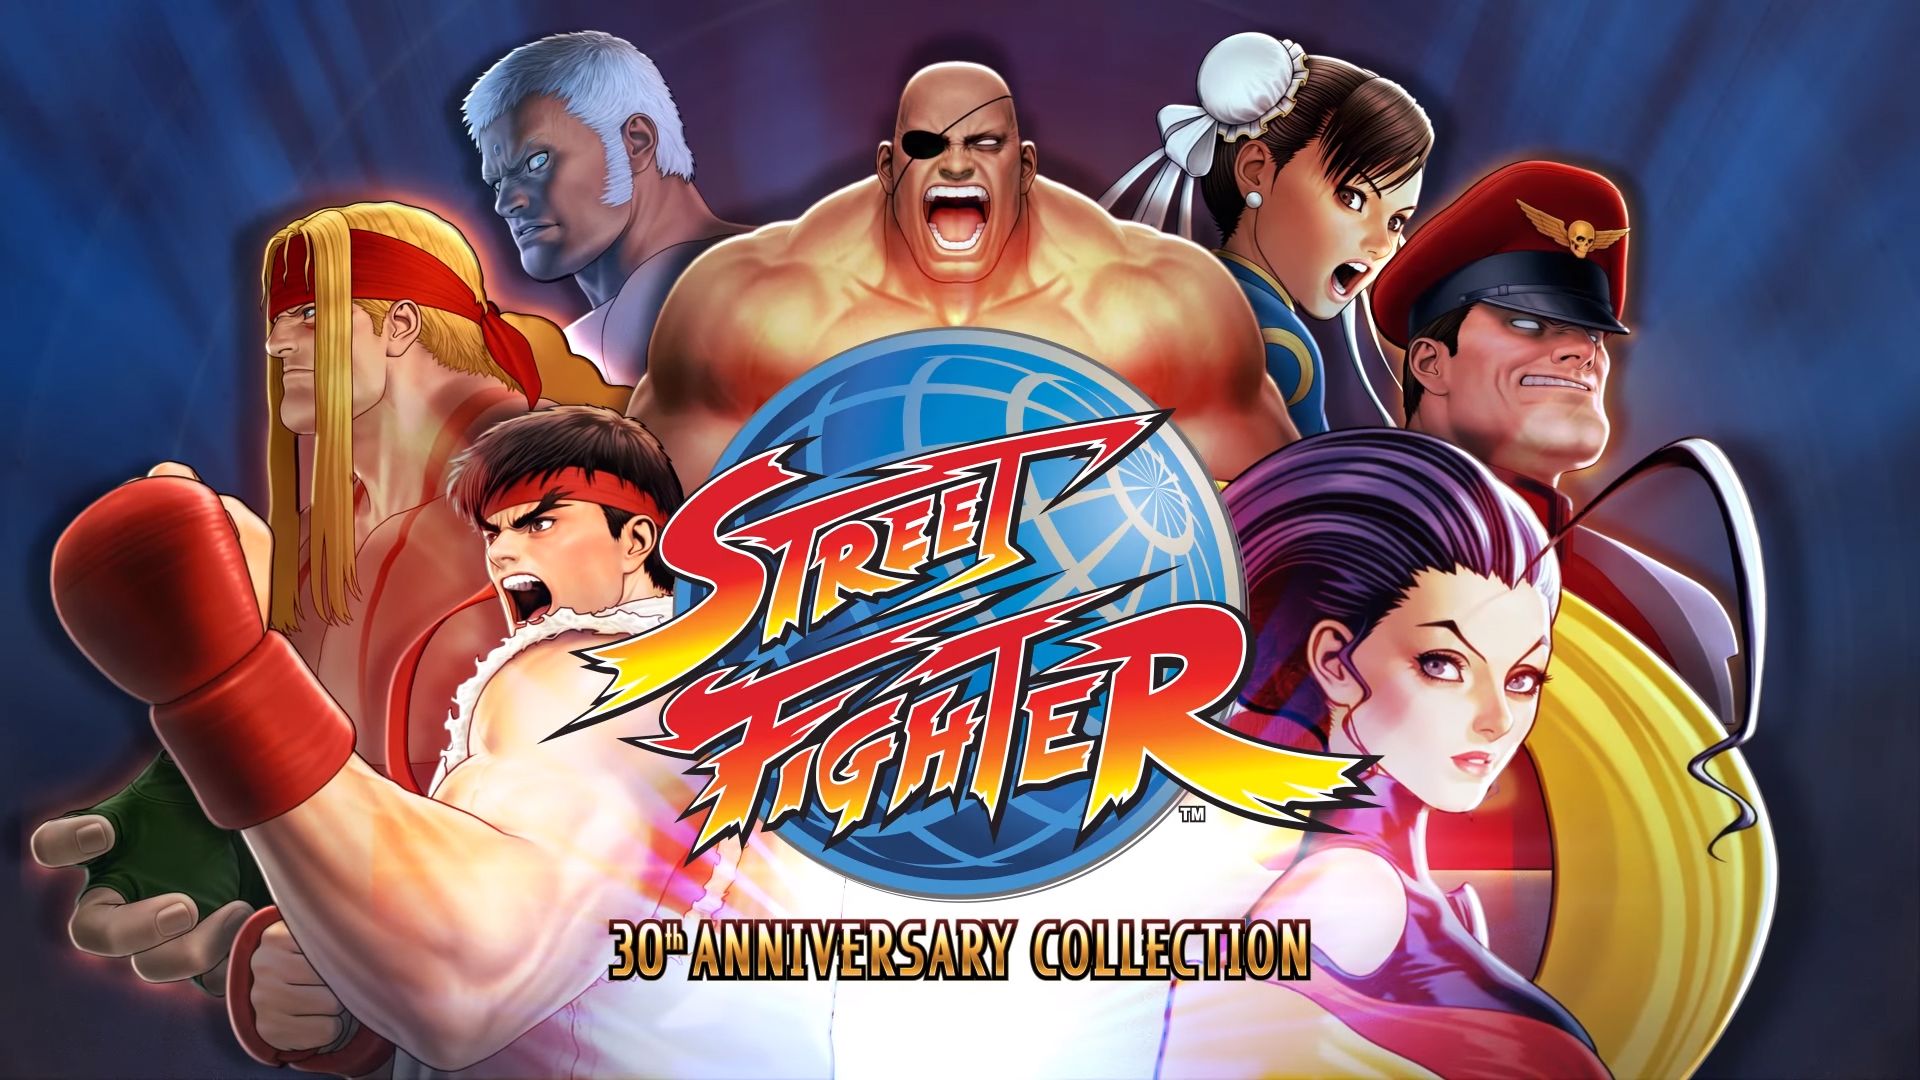 Street Fighter 30th Anniversary Collection Xbox One PC PS4 Nintendo Switch Capcom